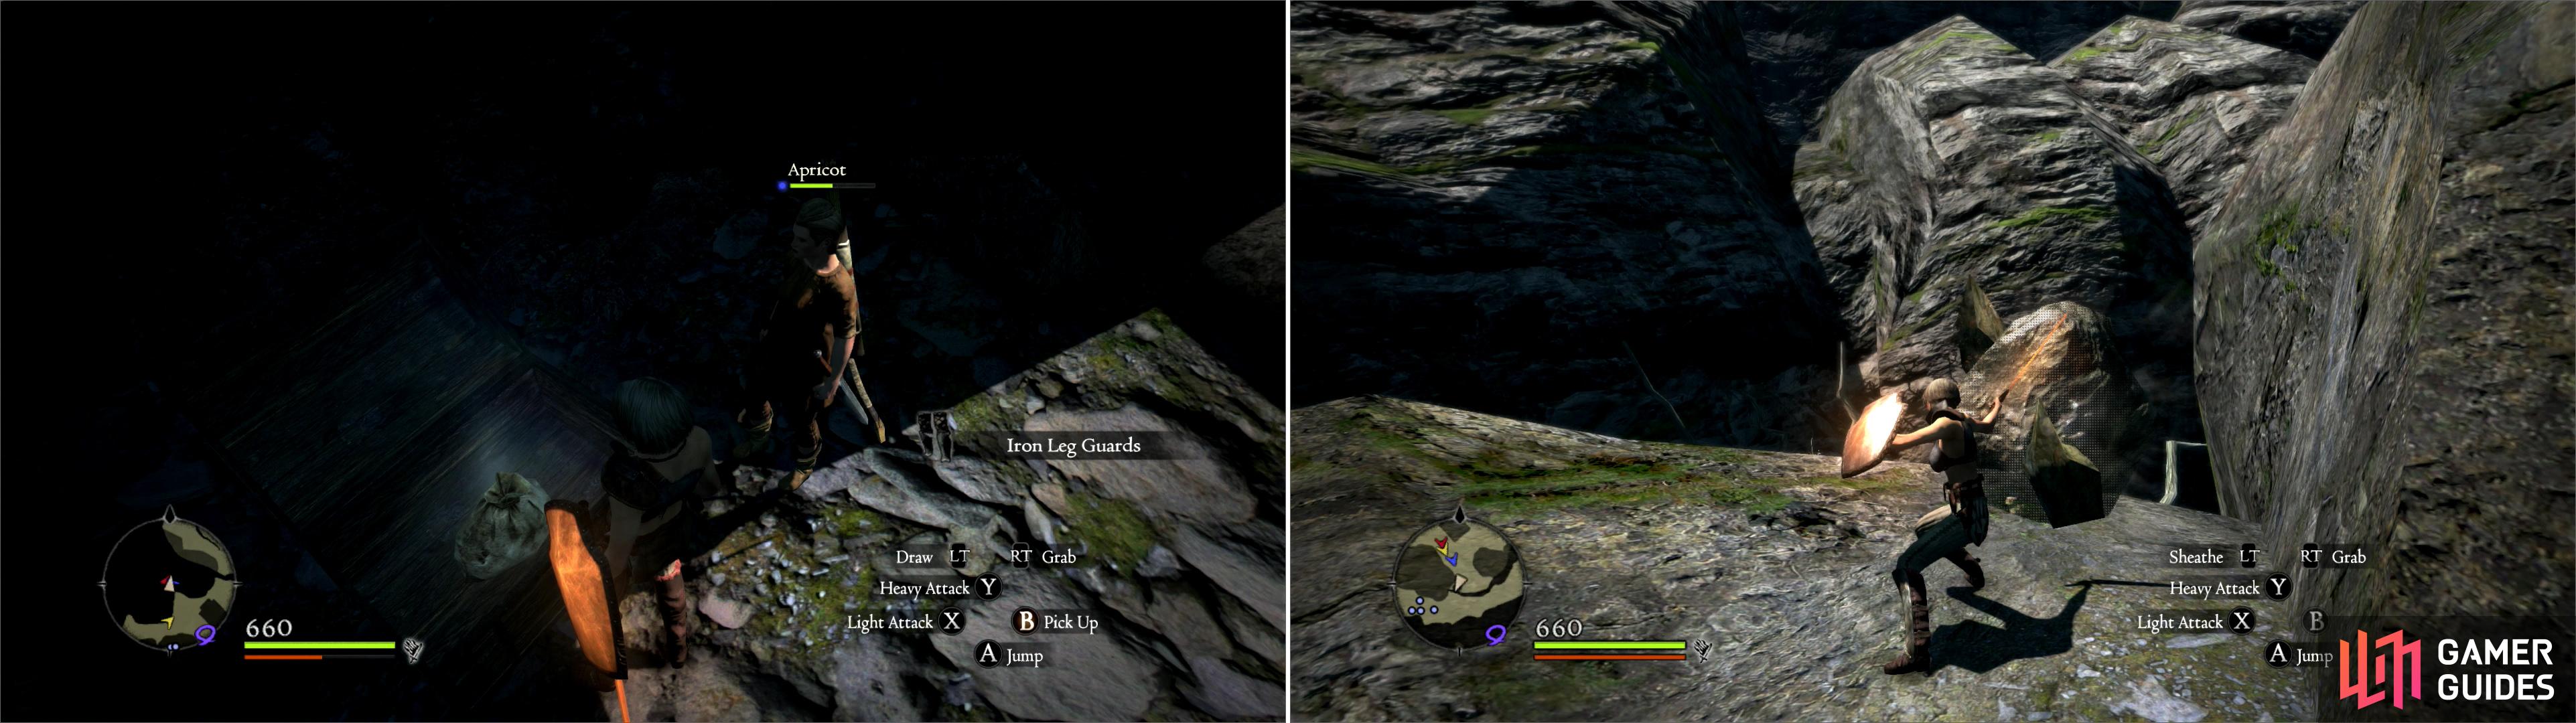 You can find new gear in a handful of chesta found during your trip through Moonsbit Pass (left). Destroy some boulders to prevent them from troubling you later (right).